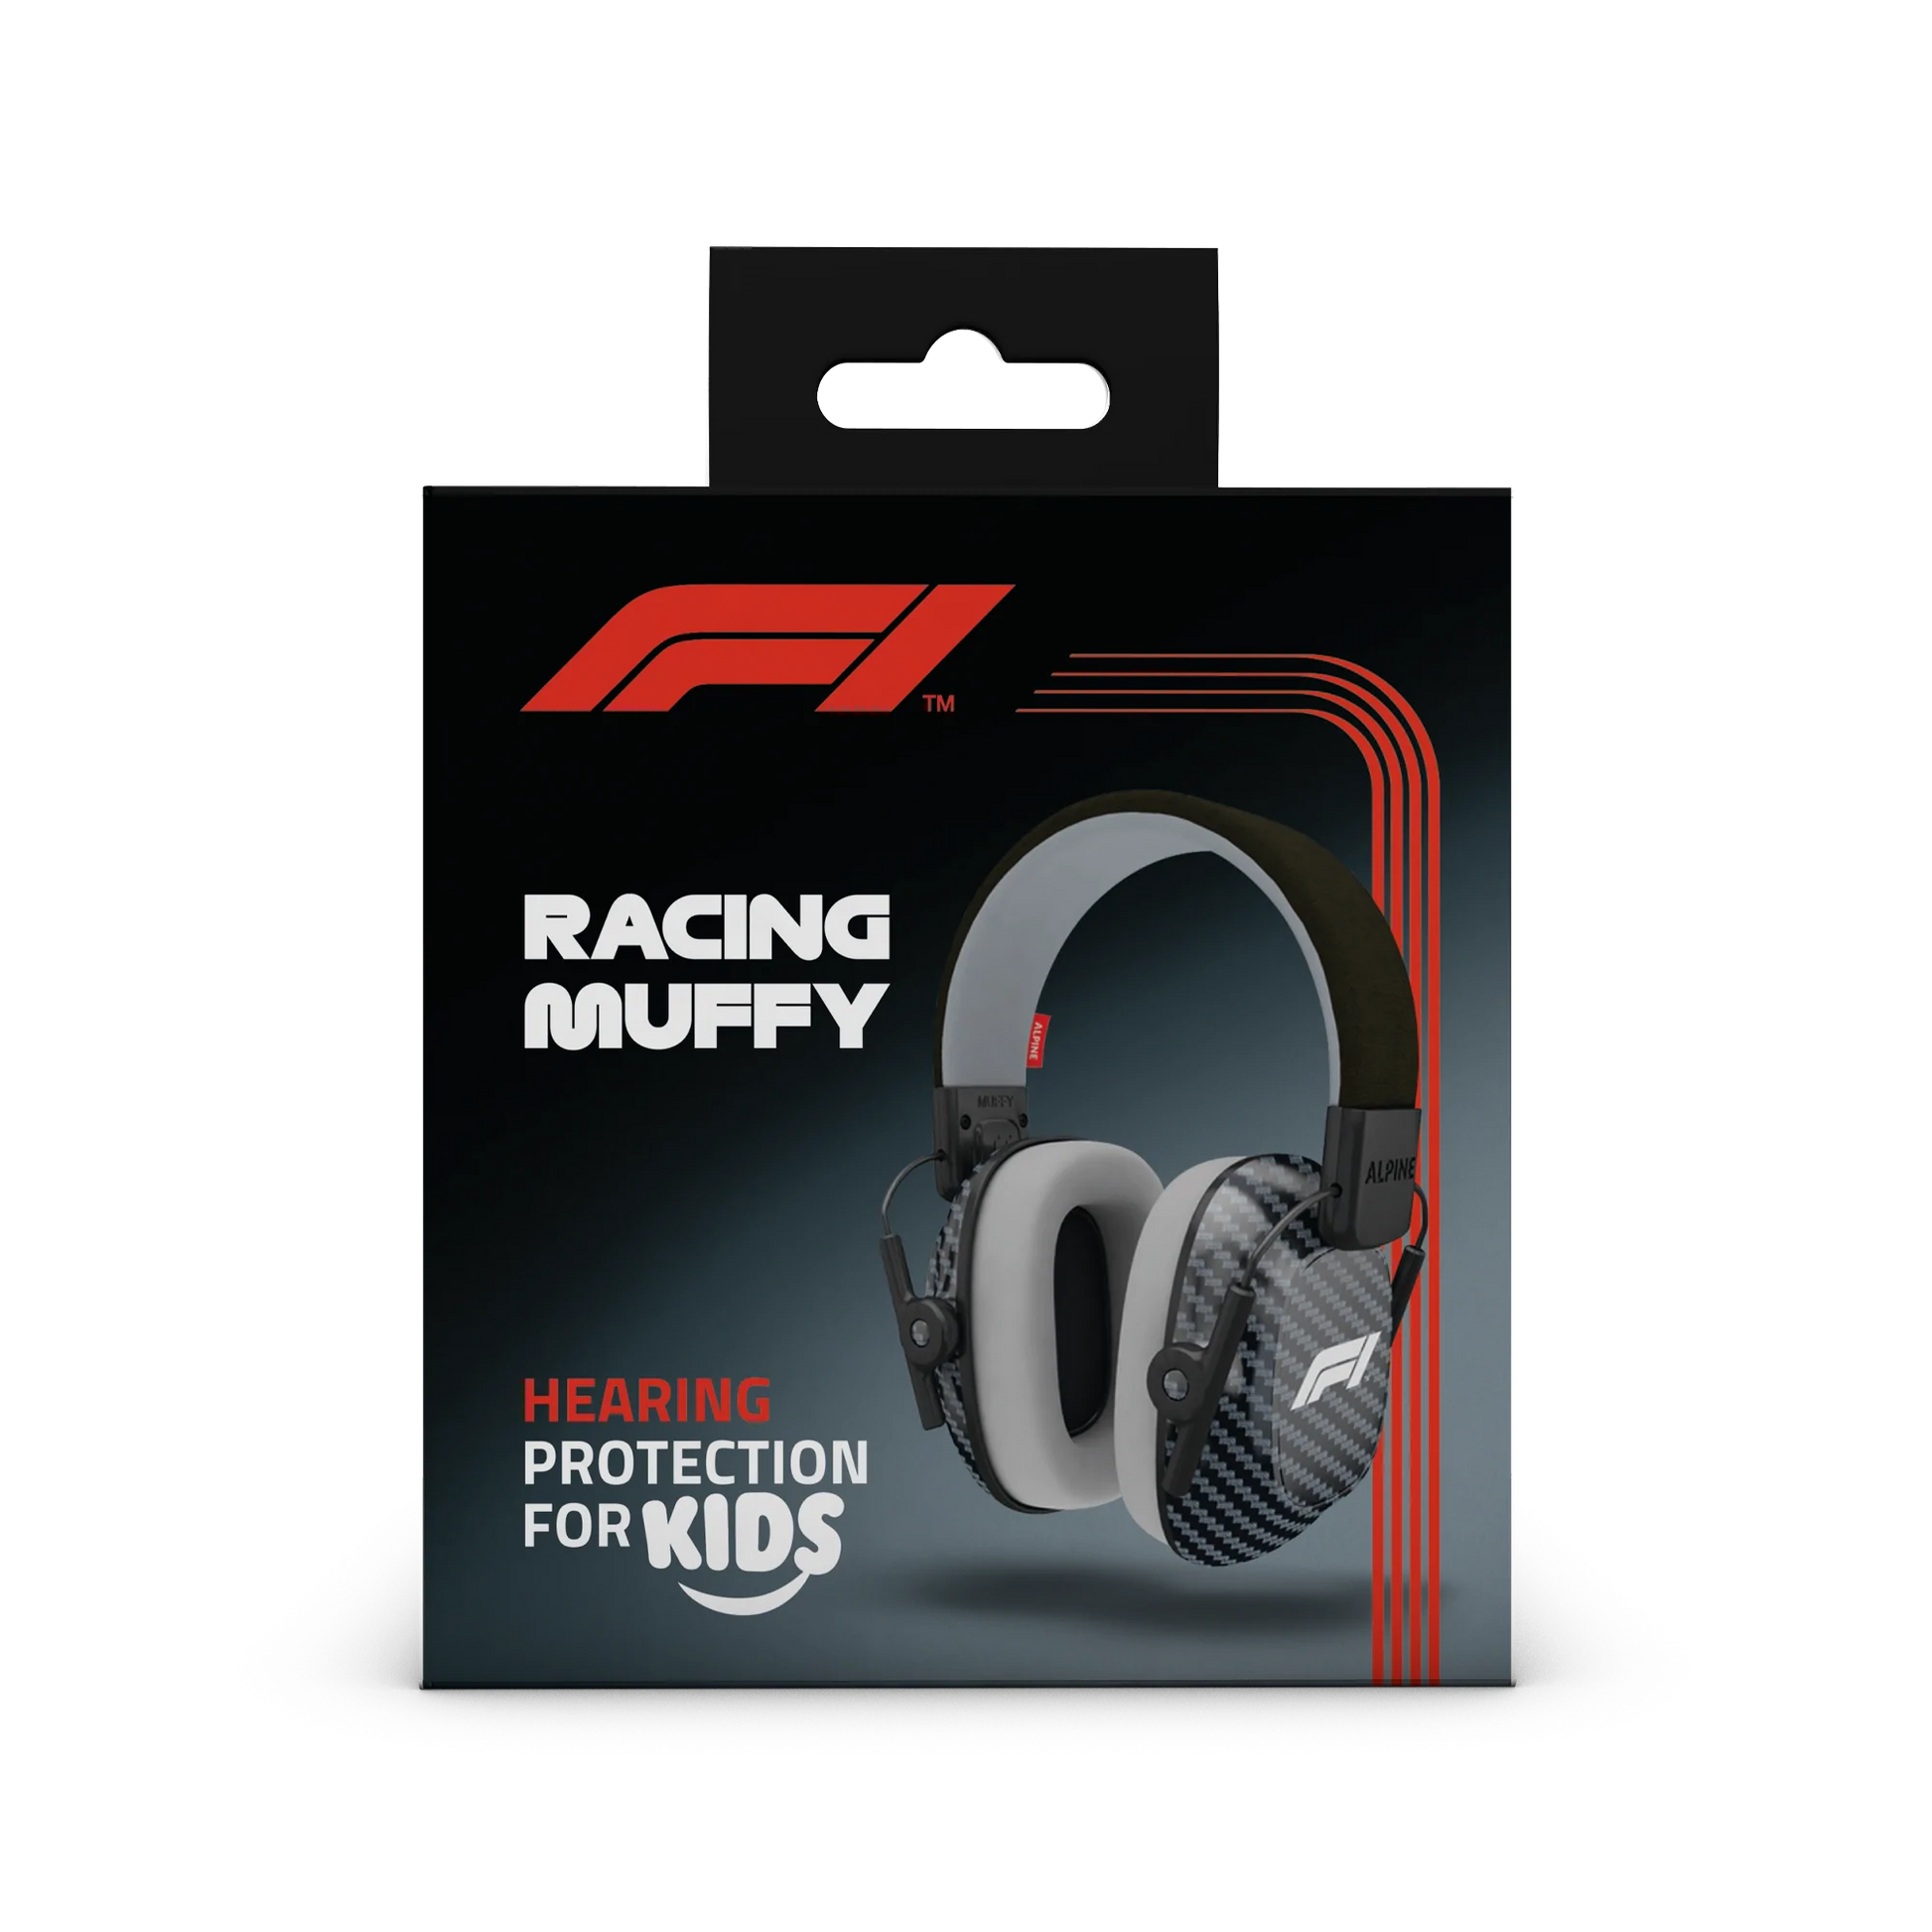 Formula 1® Racing Muffy for kids - official F1 Earmuffs for racing and professional hearing protection  Alpine hearing protection Earplugs earmuffs protect your ear red dot award motor MotoSafe Formula1 MotoGP Traveling Trip Sunset on the road MotoGP Racing Muffy MotoGP Racing Pro MotoSafe Pro